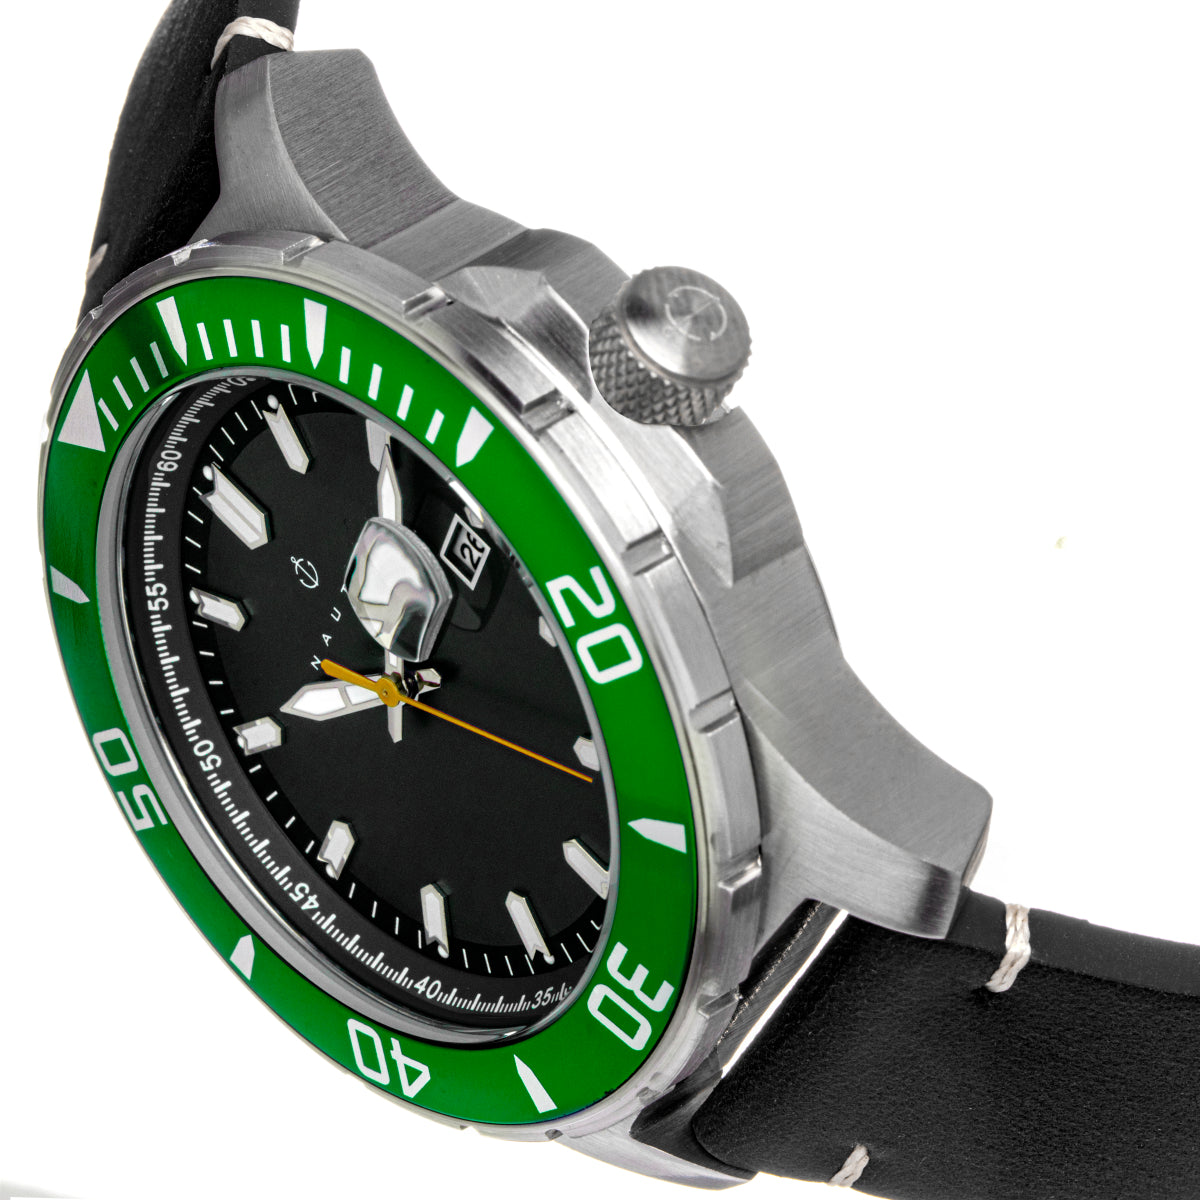 Nautis Dive Pro 200 Leather-Band Watch w/Date - Green/Black - GL1909-G